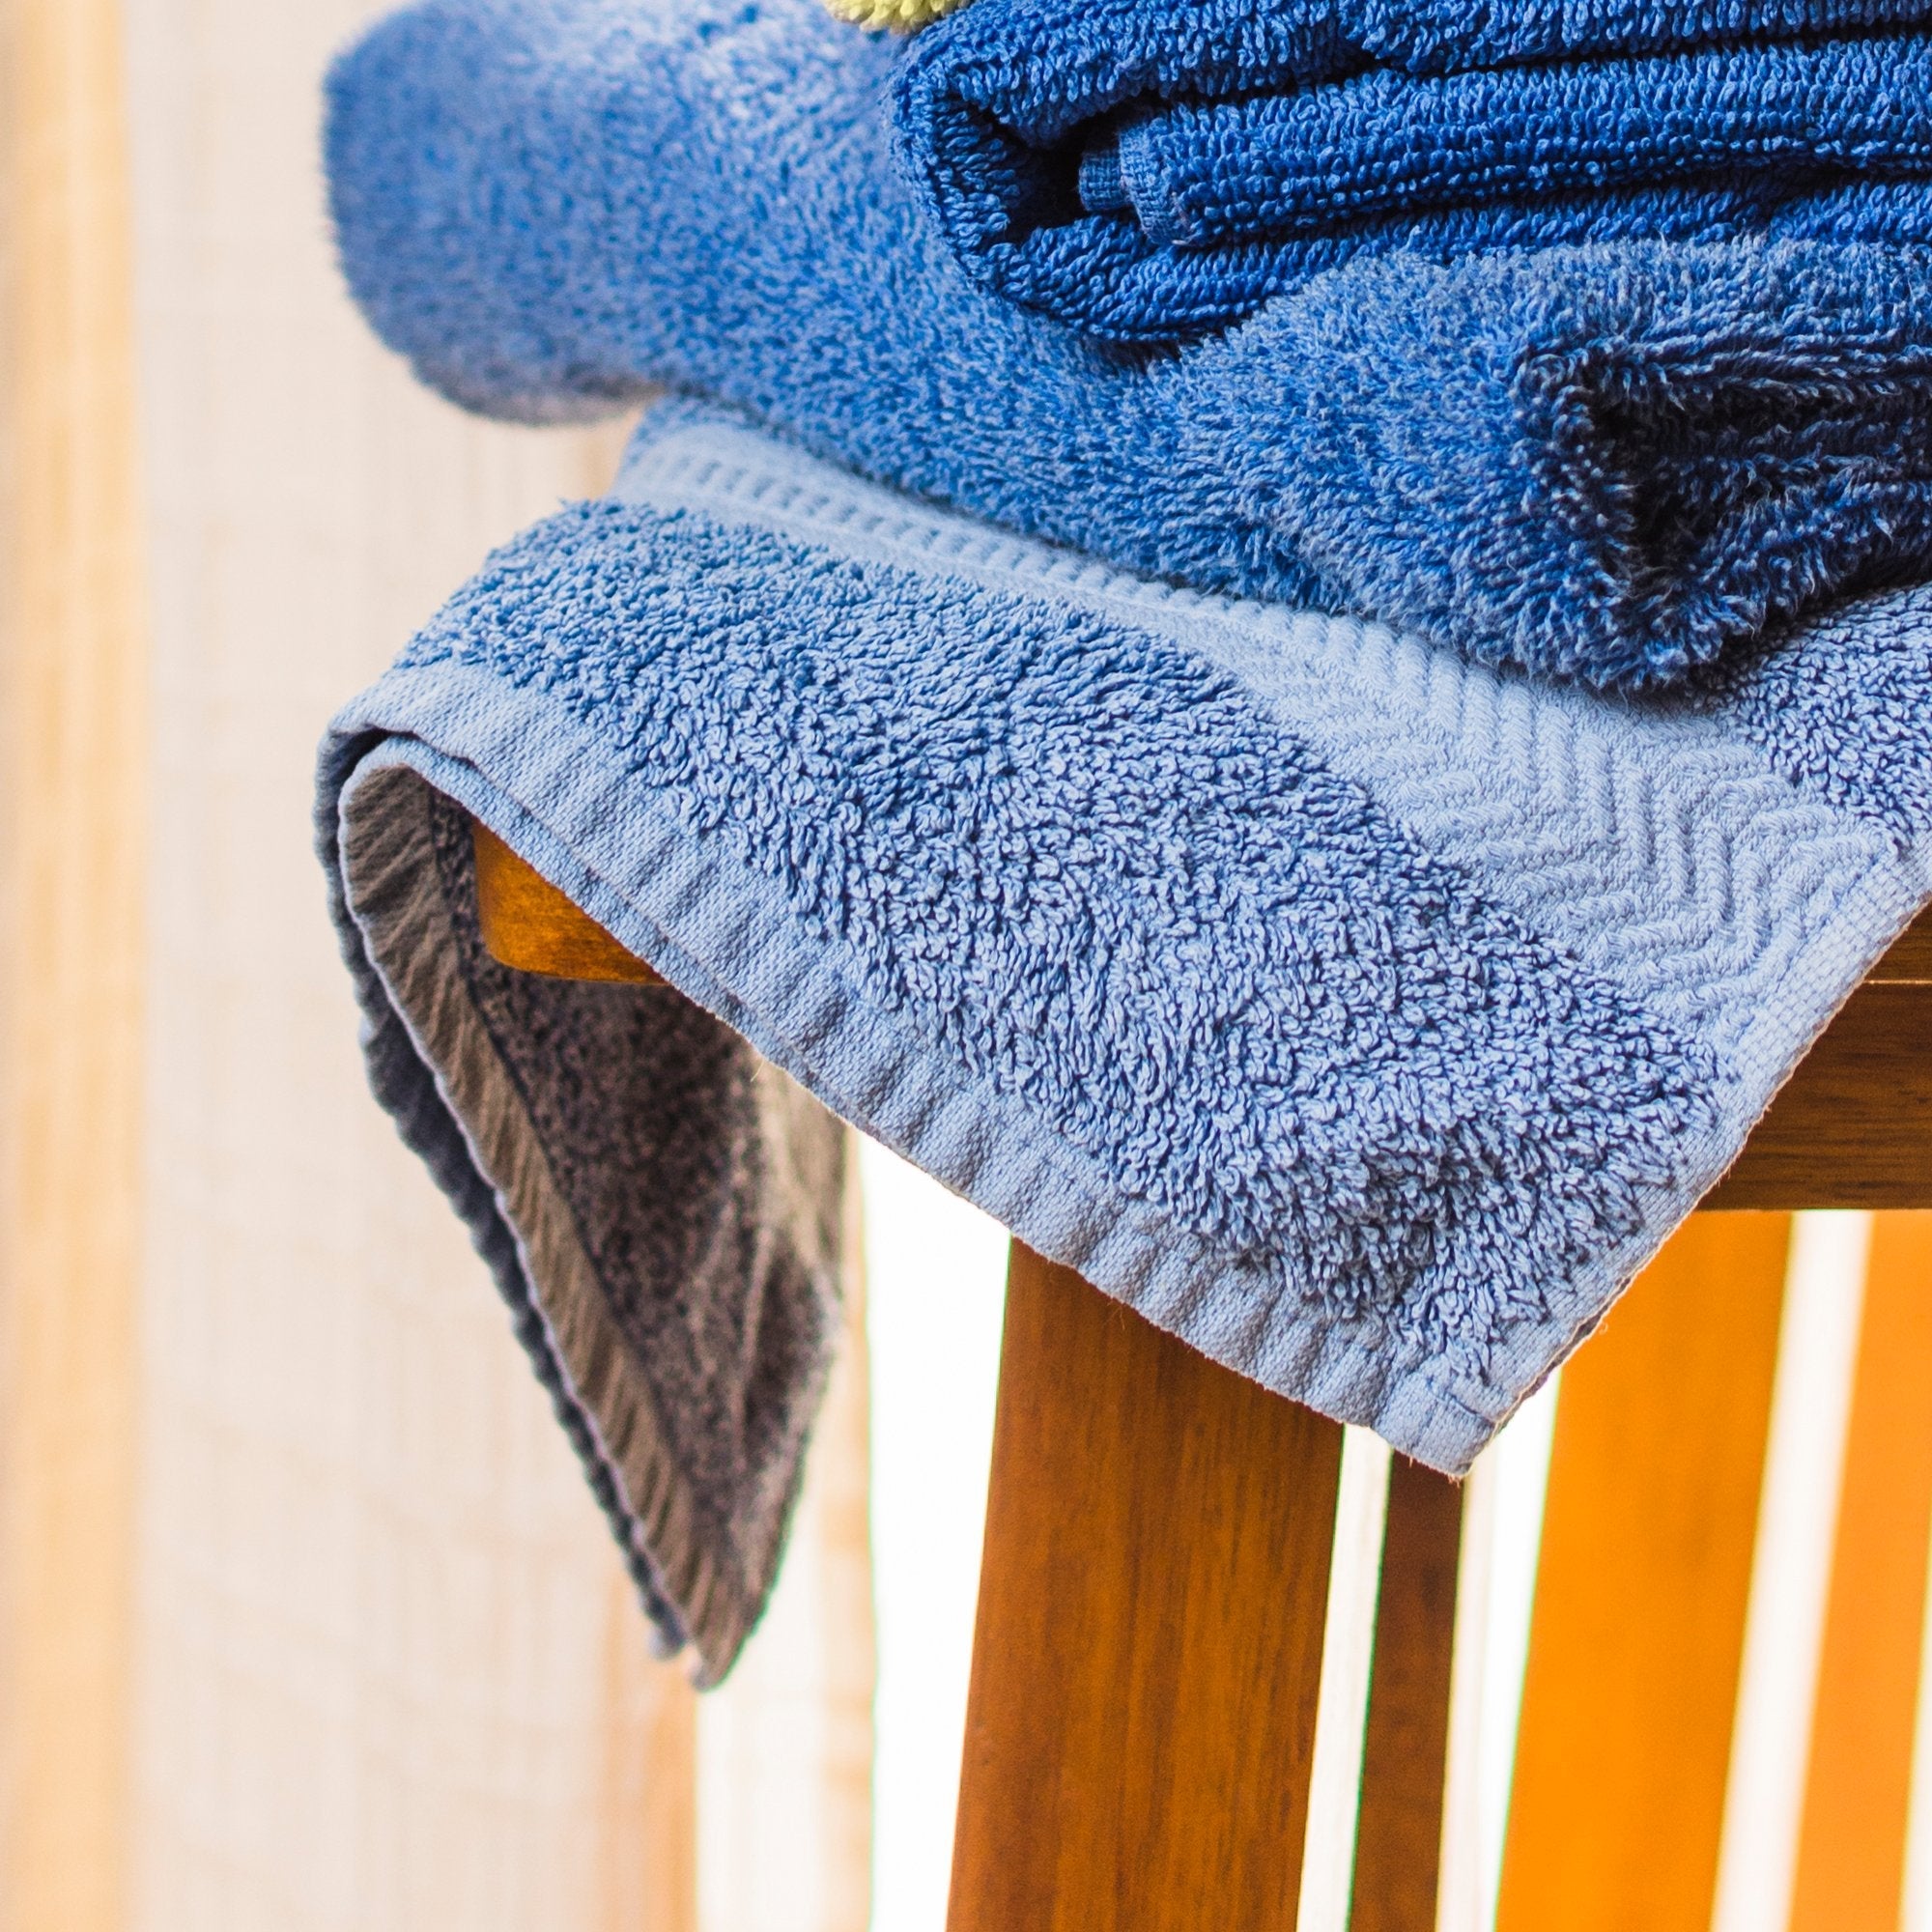 Blue Towel on wooden stool